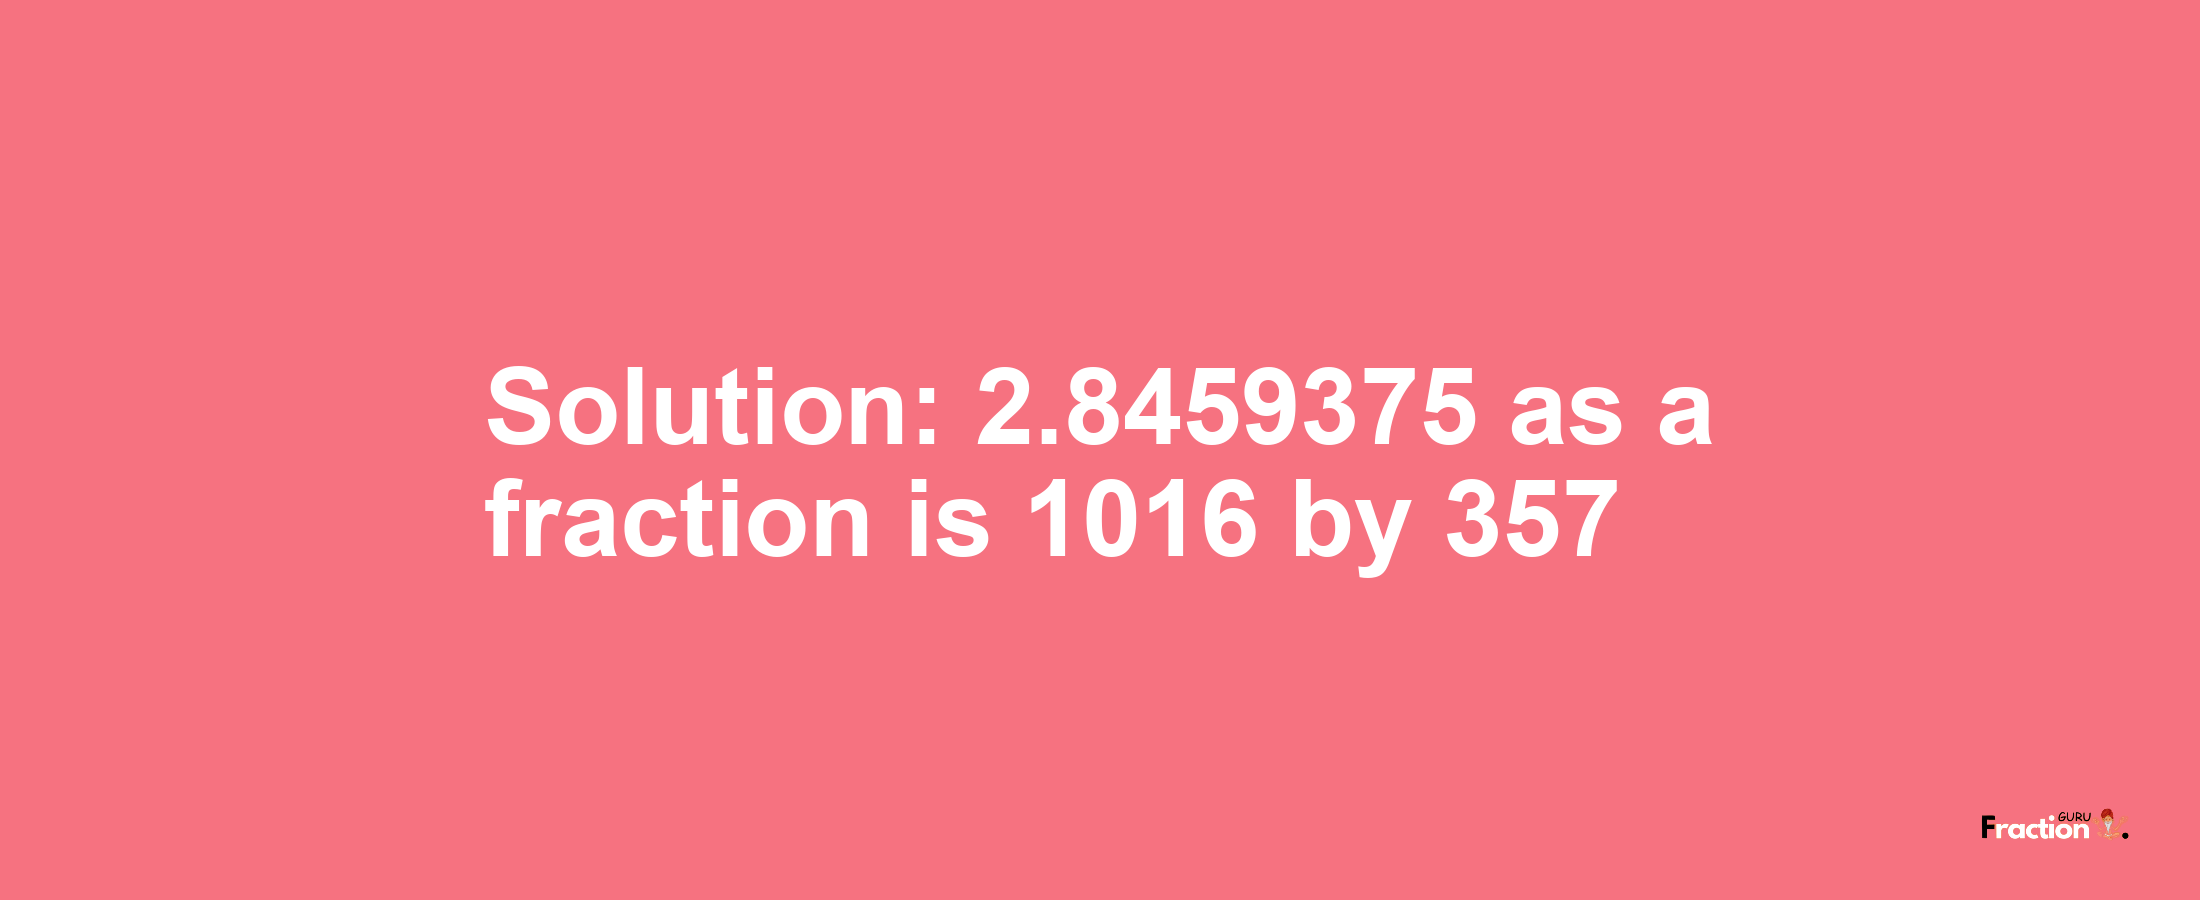 Solution:2.8459375 as a fraction is 1016/357